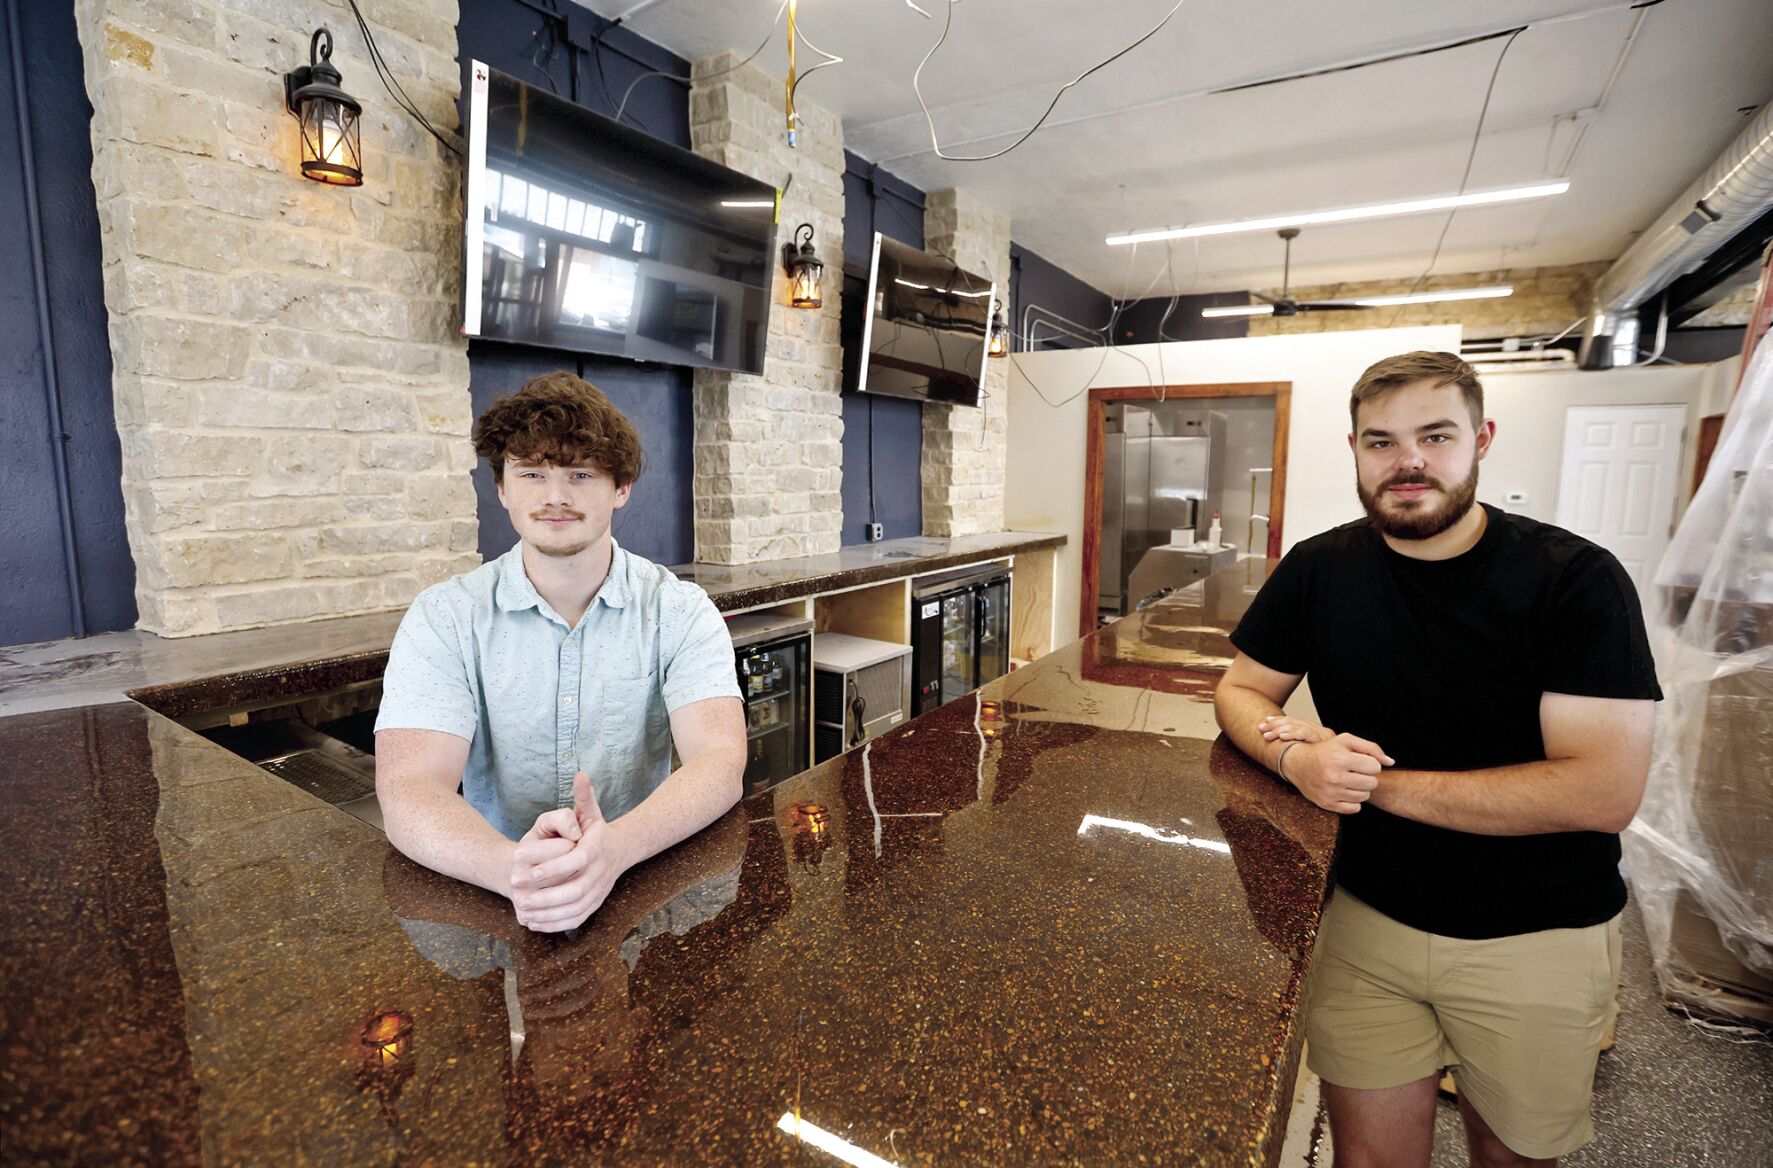 Owners Patrick Kelly (left) and Payton Marshall plan to open their new bar, Prost, in Bellevue, Iowa, on Saturday, Aug. 12. Grand opening festivities will include food trucks and live music at the bar.    PHOTO CREDIT: JESSICA REILLY